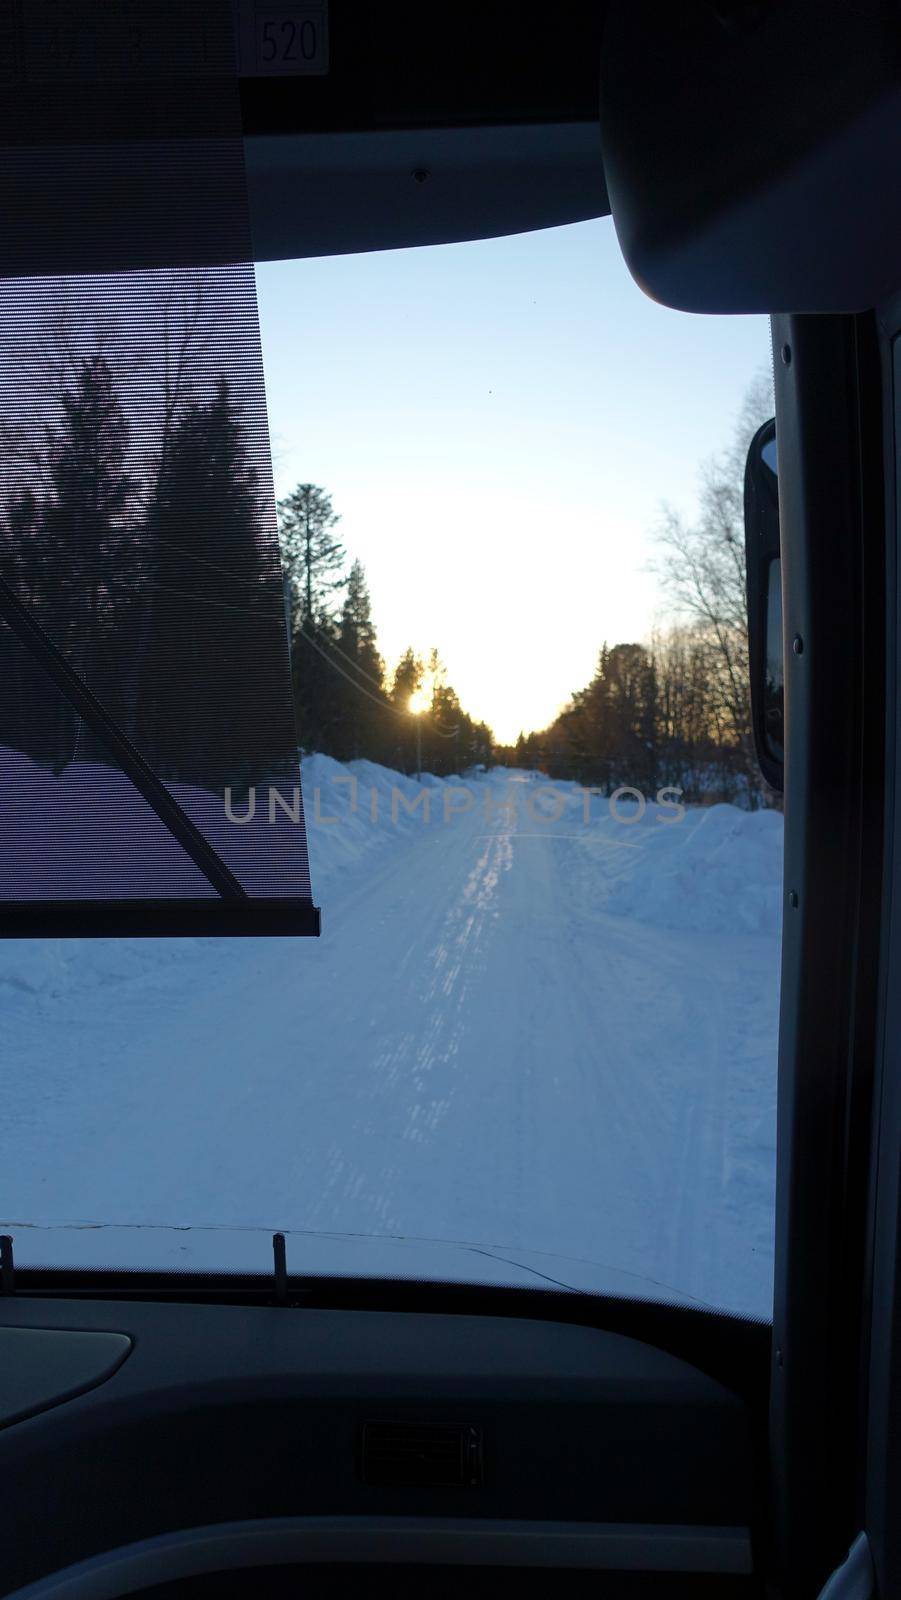 The snowy road in Northern Sweden seen during sunset from the bus